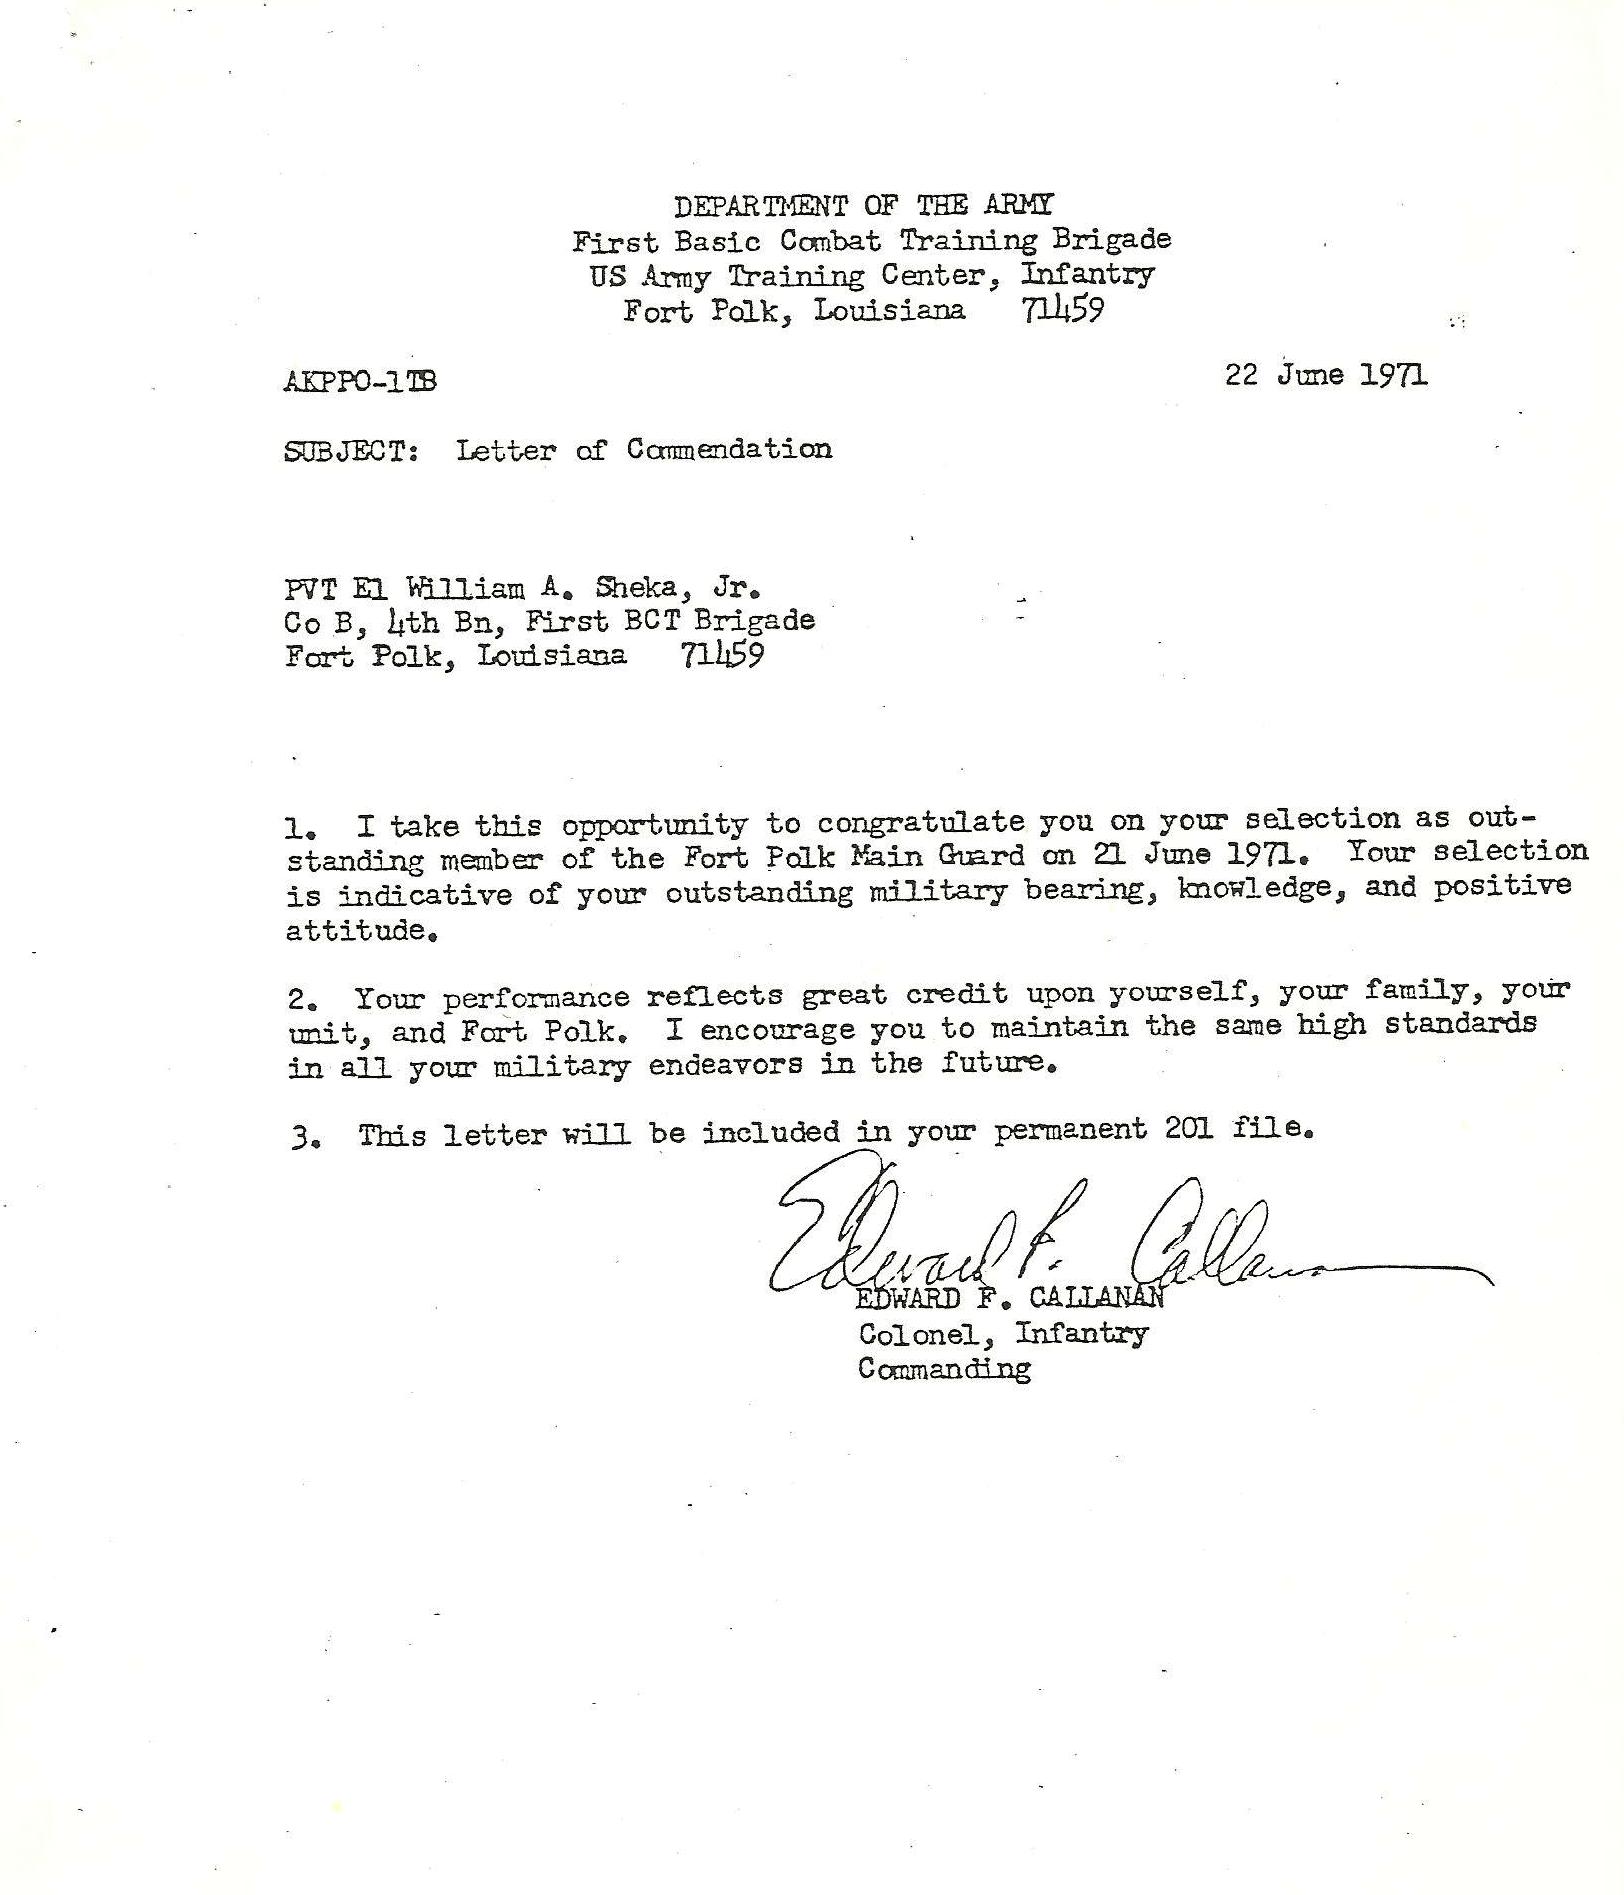 letter-of-commendation-for-william-a-sheka-jr-from-col-edward-f-call-fort-polk-22-june-1971-for-being-chosen-outstanding-soldier-of-the-fort-polk-main-gurard